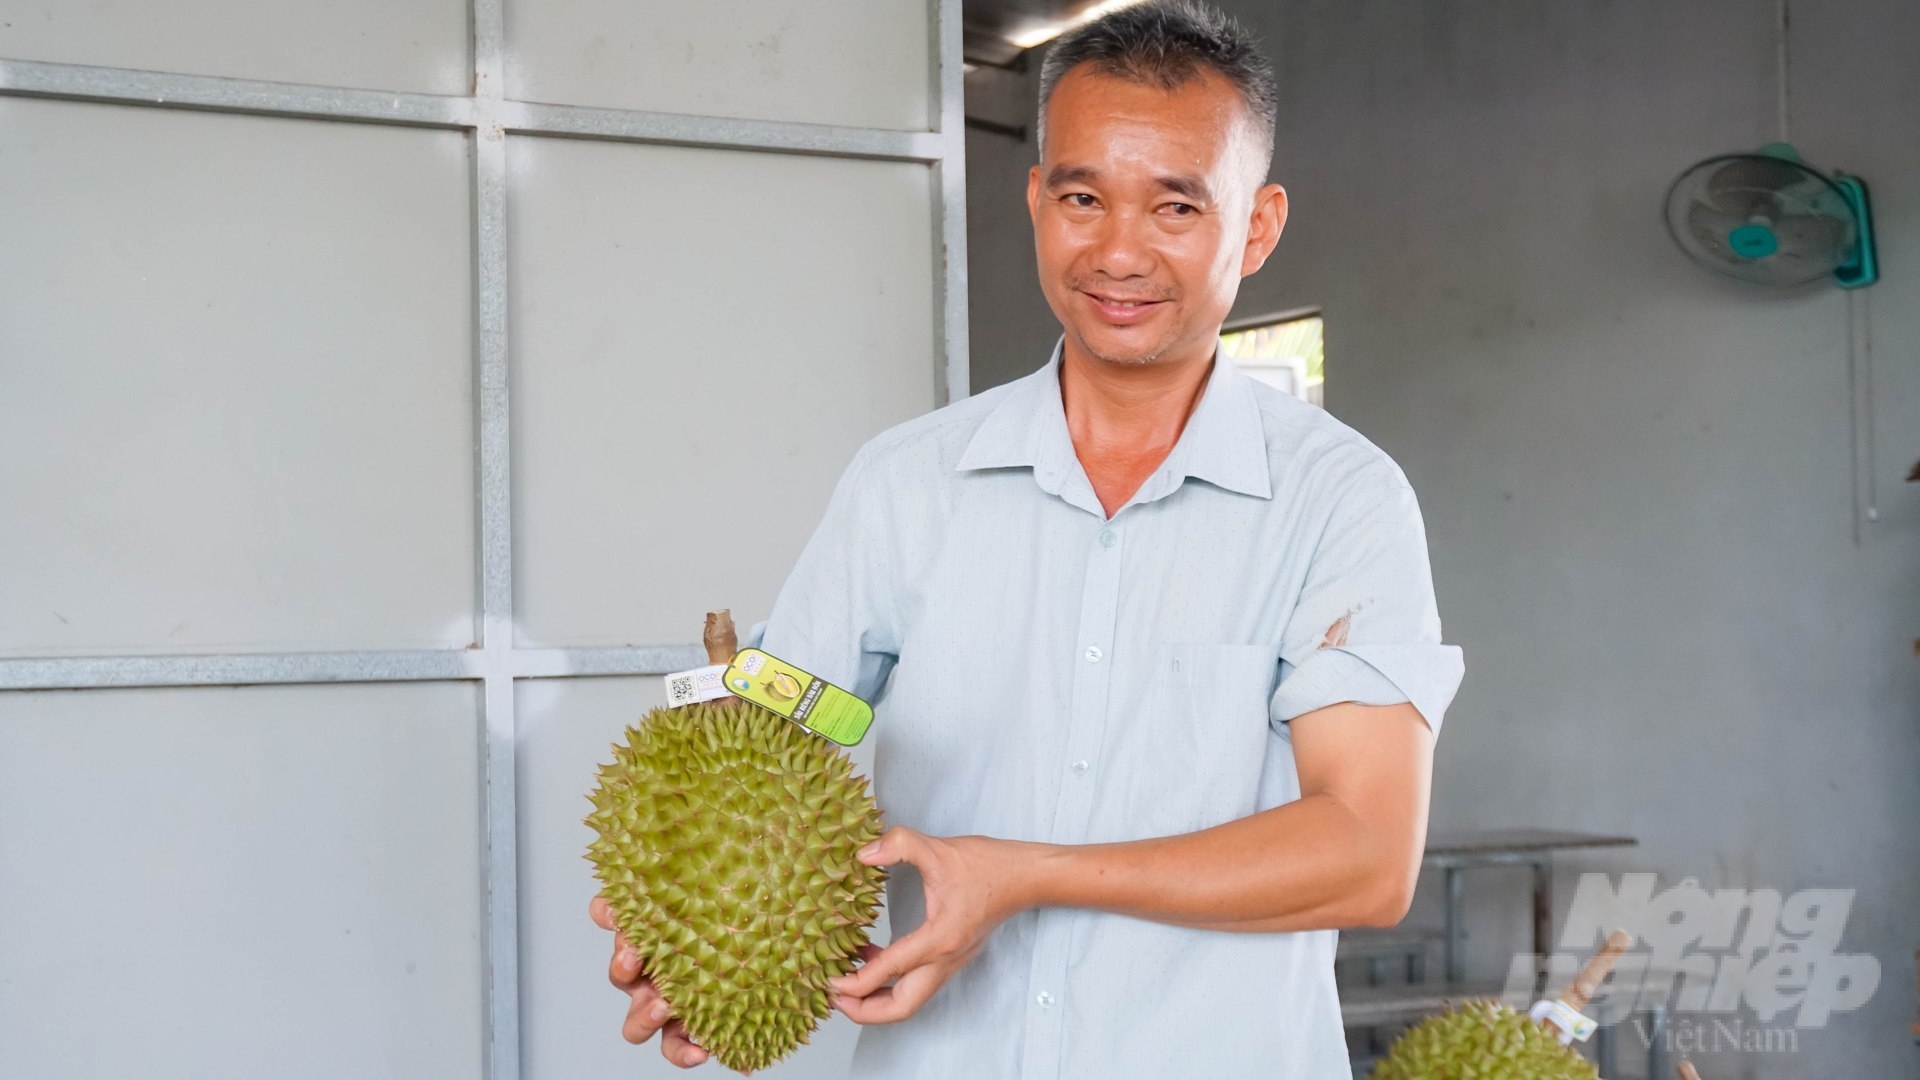 The director of Bau Don Fruit Cooperative said that this year durian in Bau Don commune was good, the price was good, and the profit was nearly double compared to every year. Photo: Le Binh.